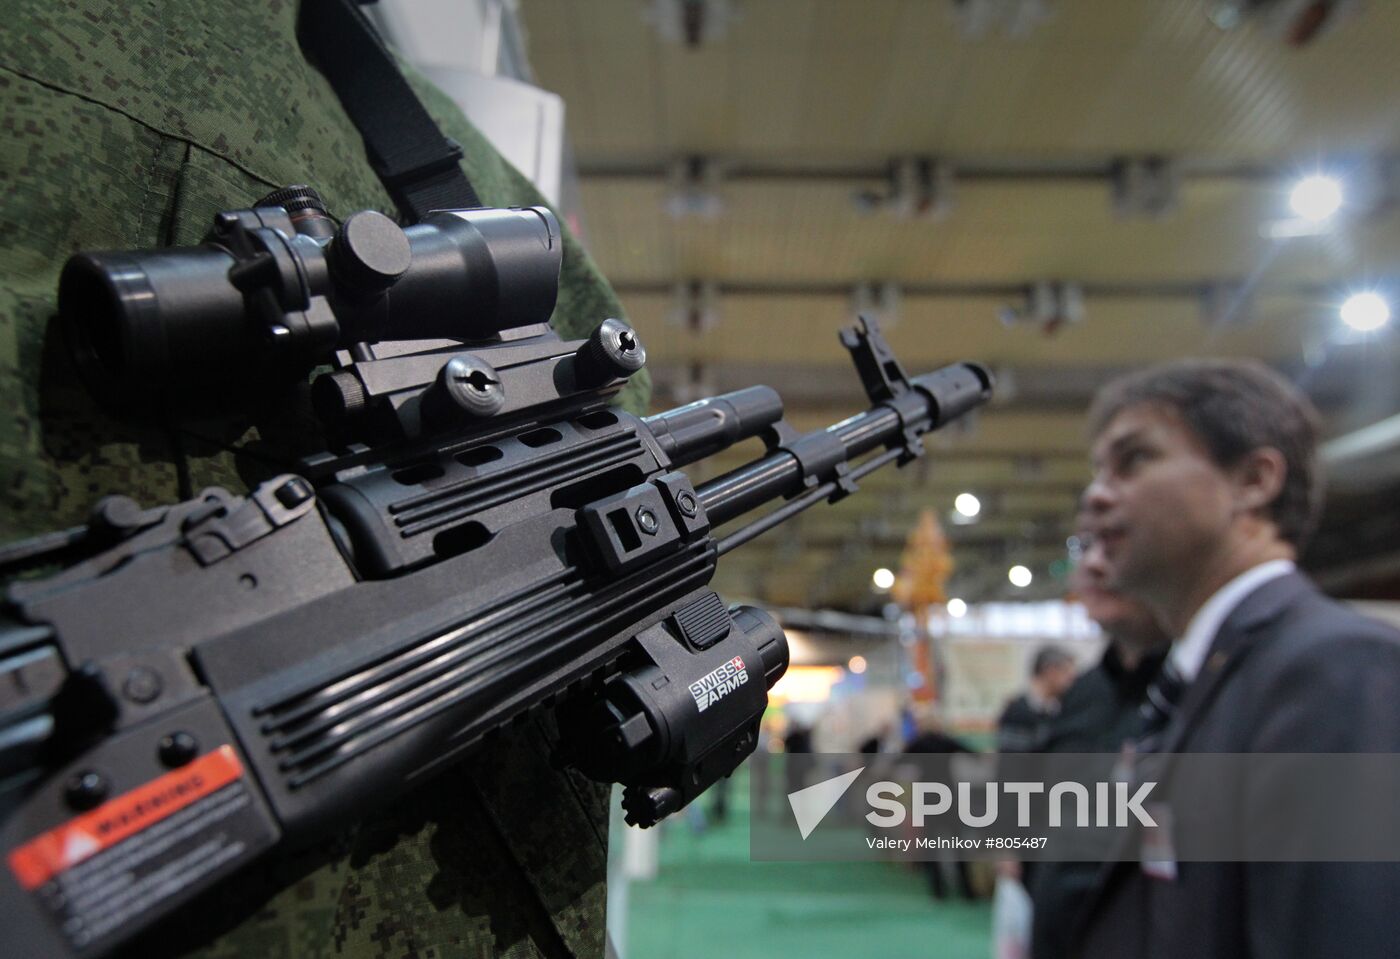 Exhibition, Russian Manufacturers and Armed Forces Supply